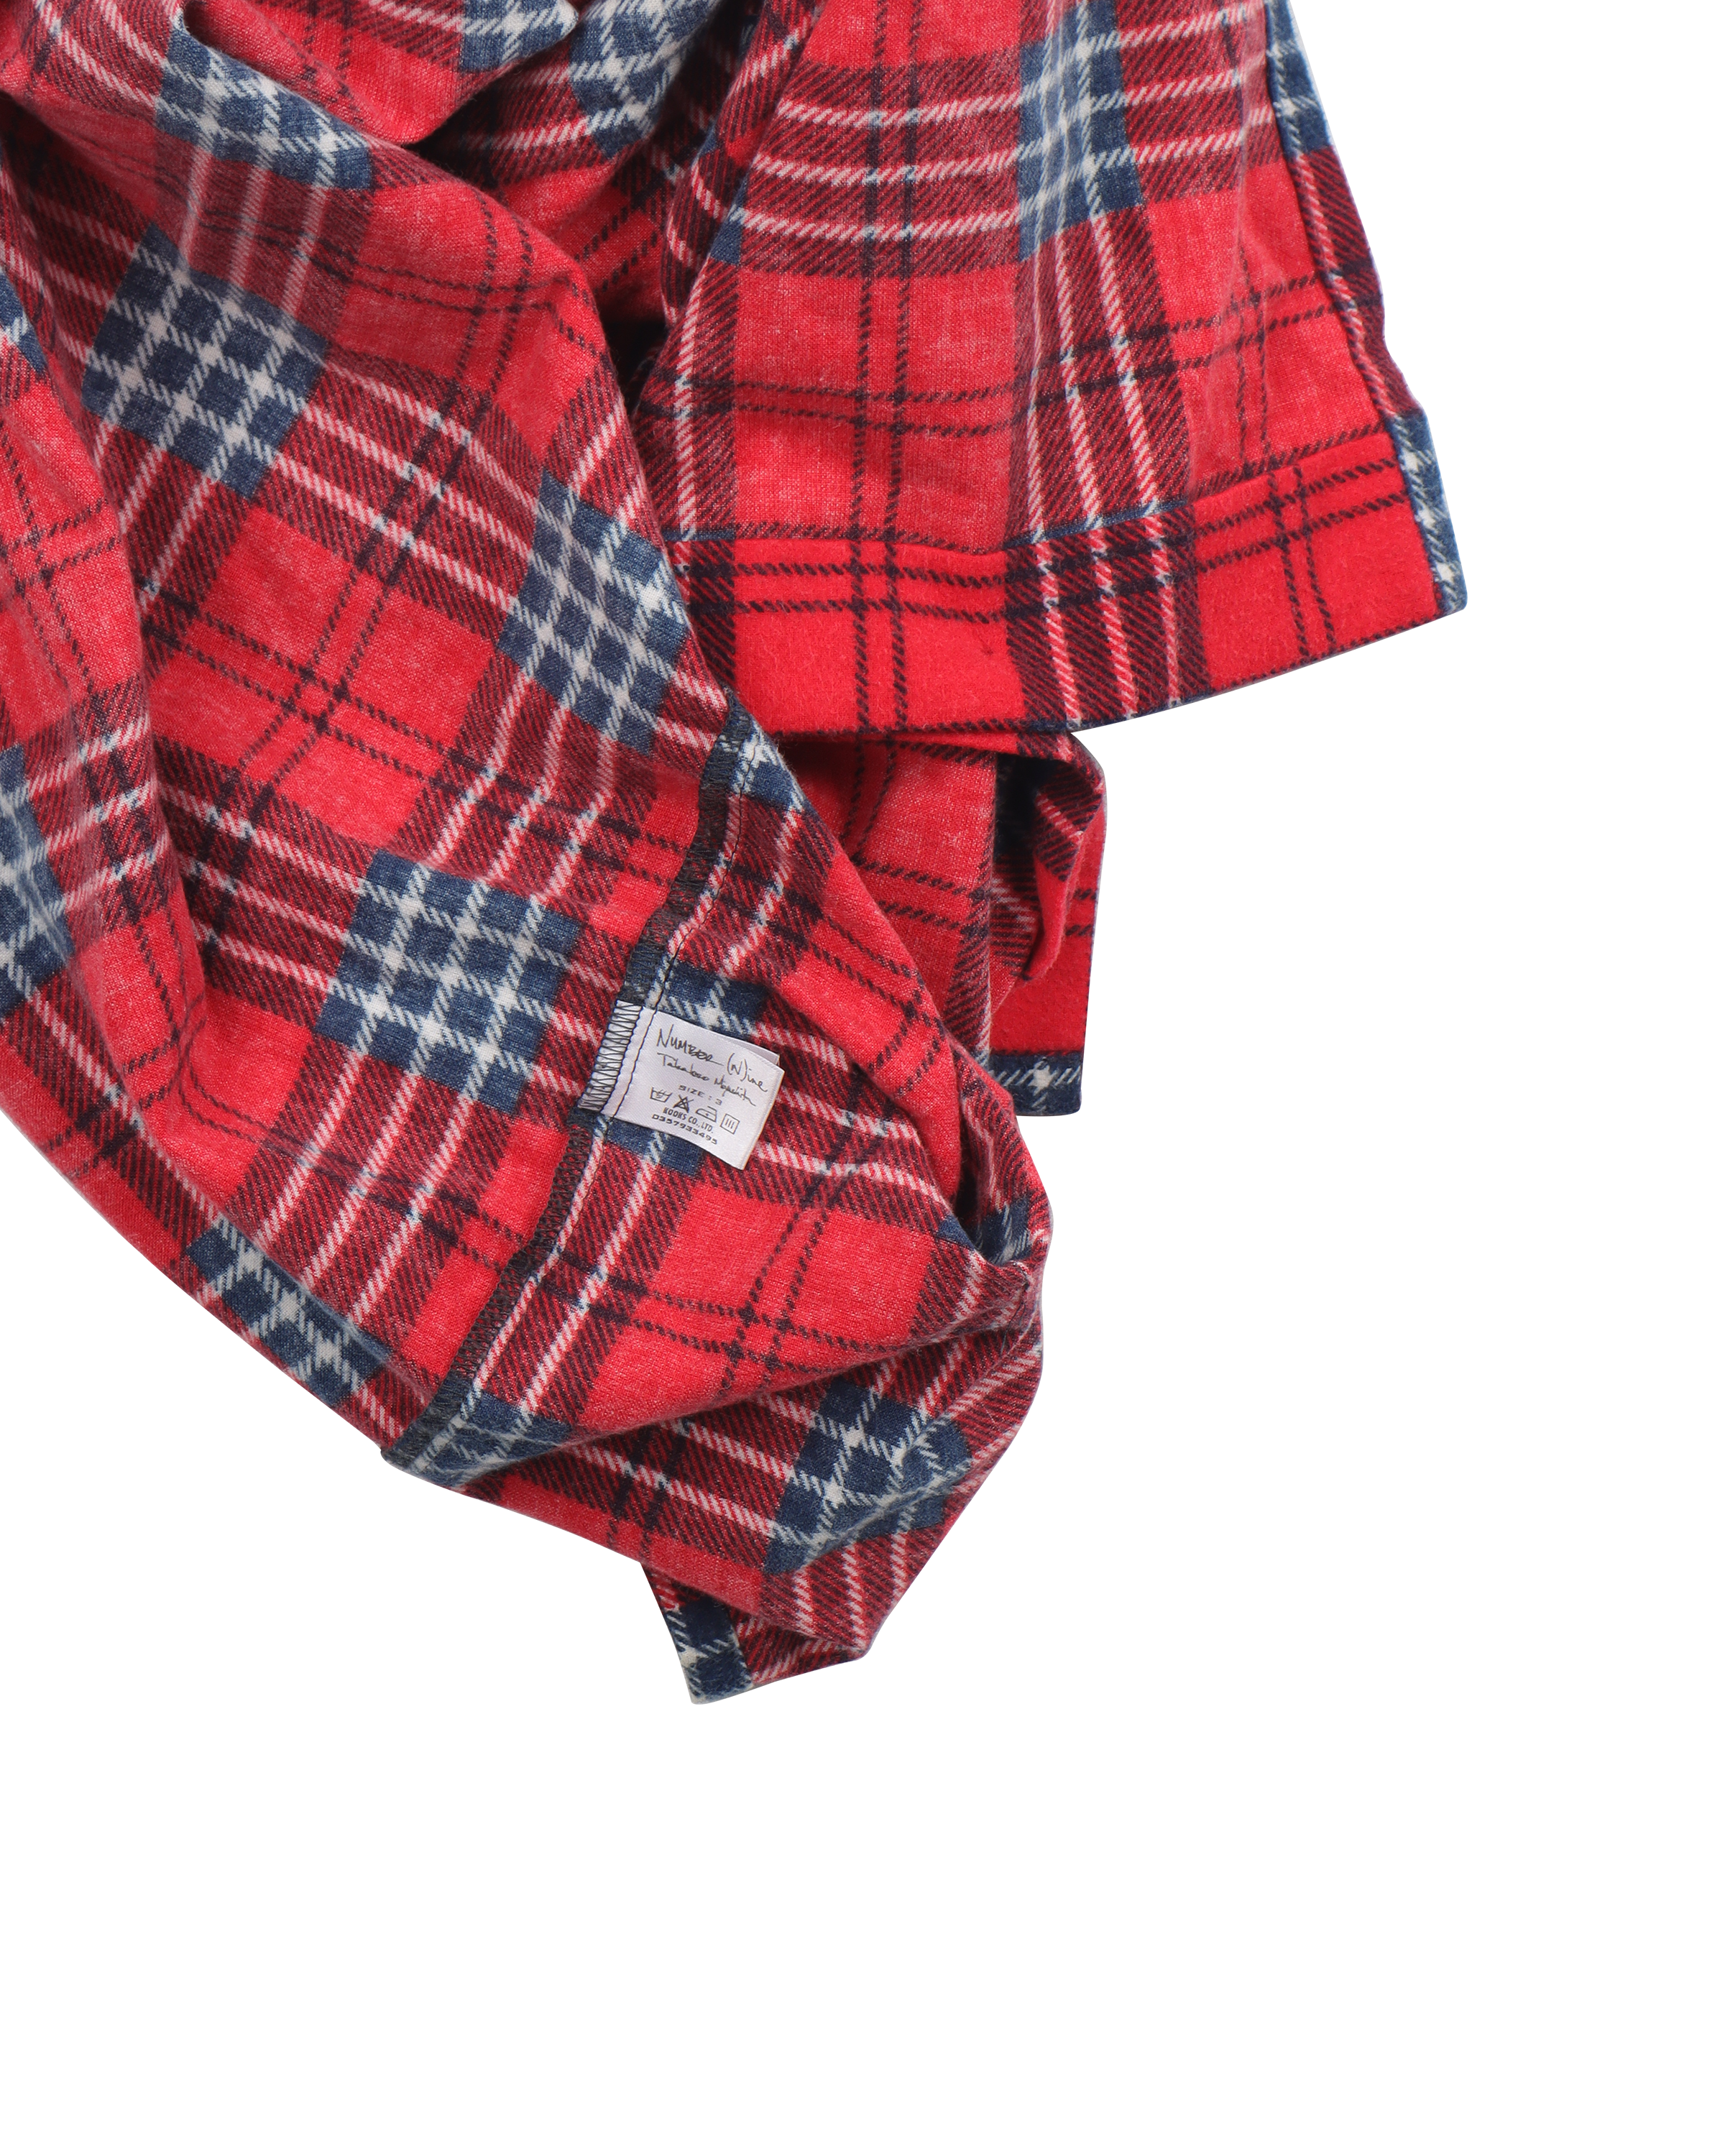 Sleeveless Flannel Shirt (2005) "The High Streets"